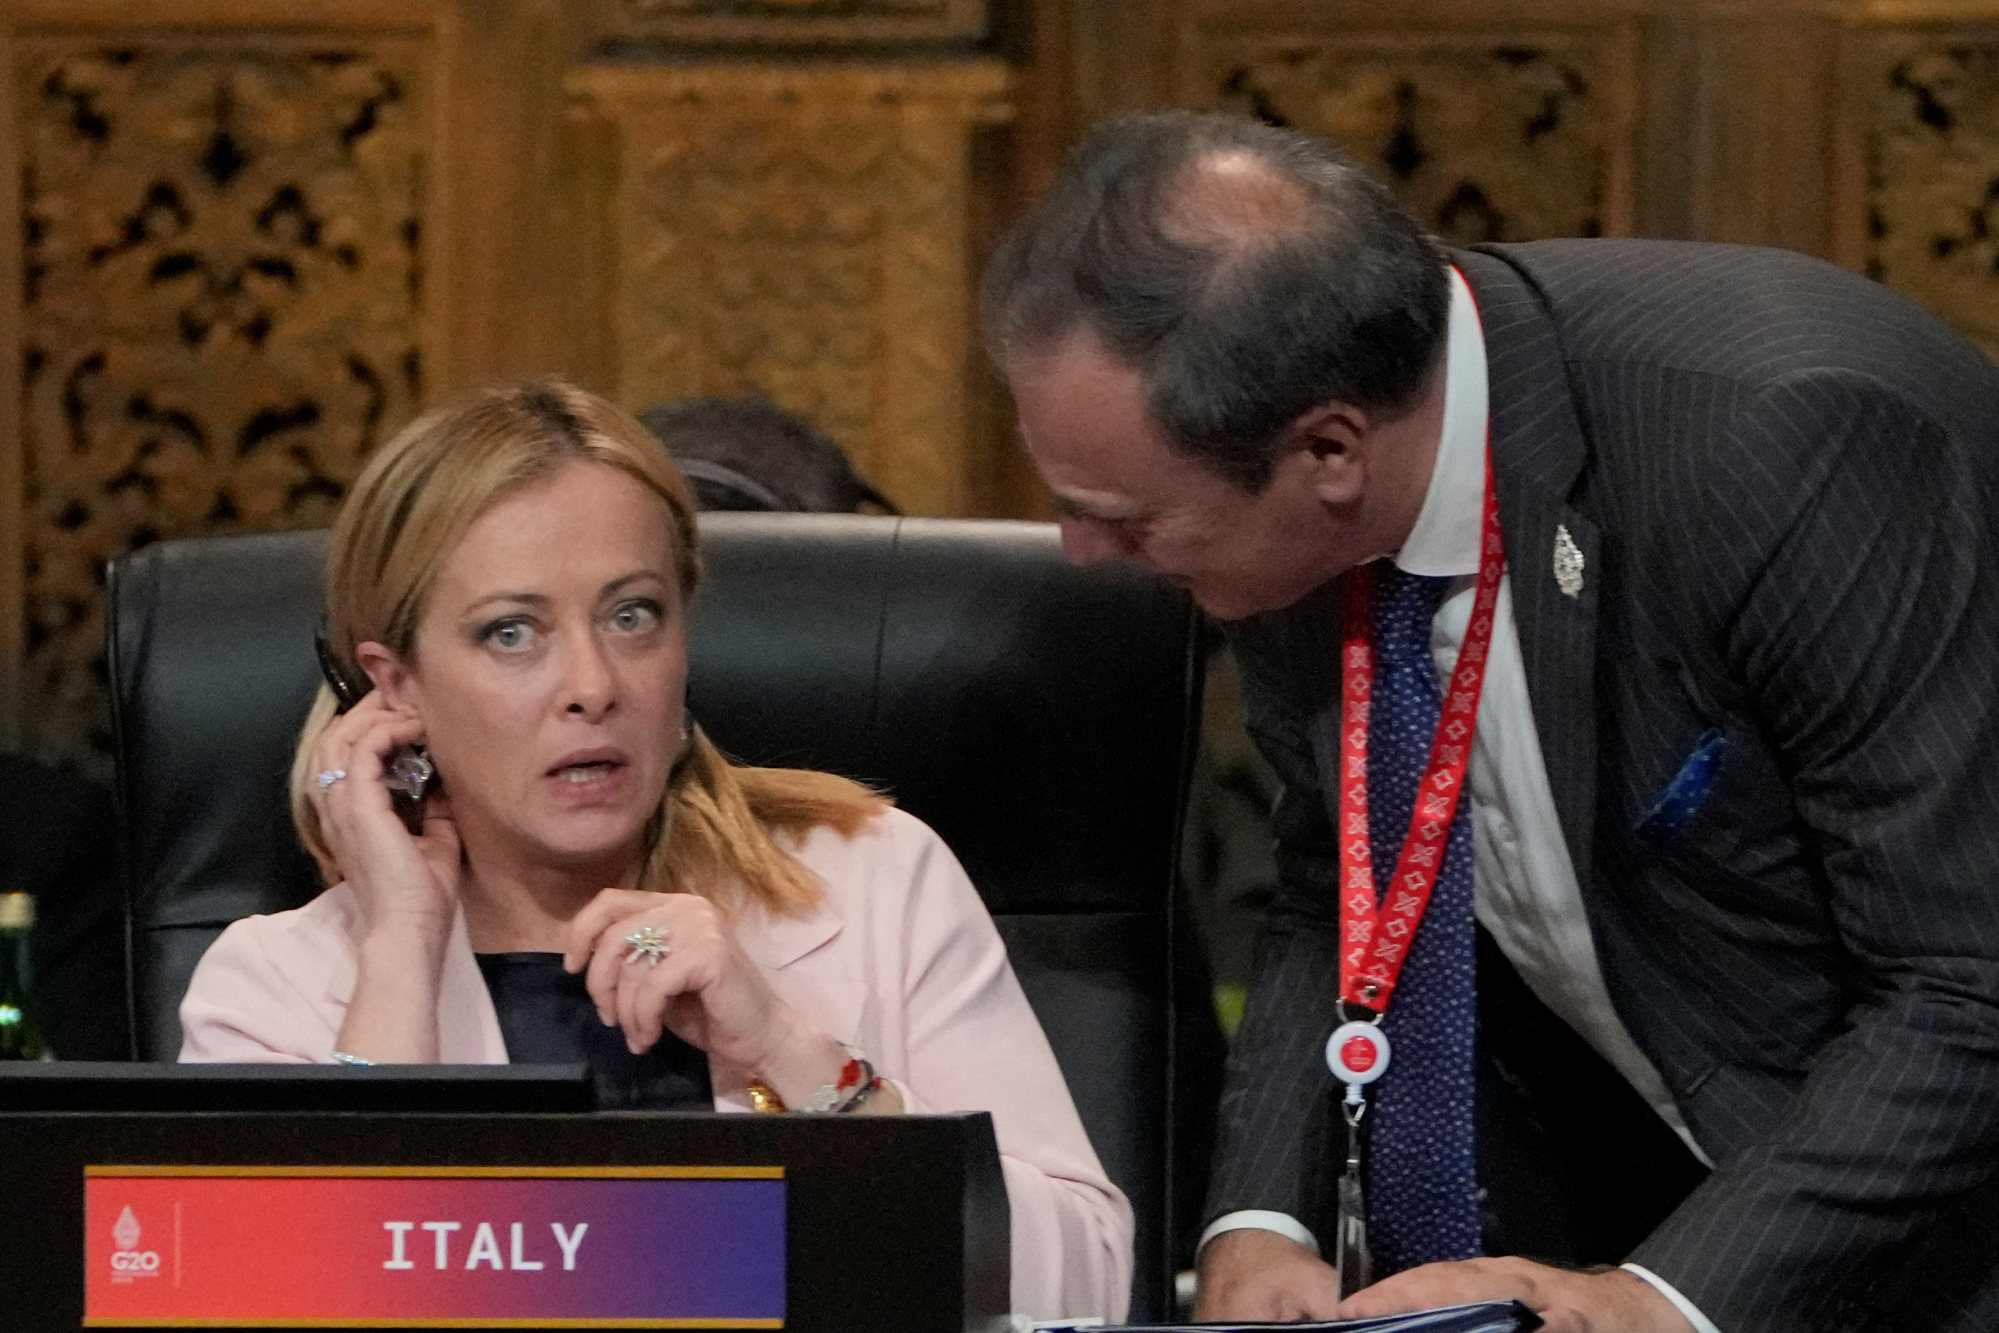 Italian Prime Minister Giorgia Meloni at the G20 leaders summit in Bali. Italian media has reported that Xi plans to meet with her on Wednesday. Photo: Reuters